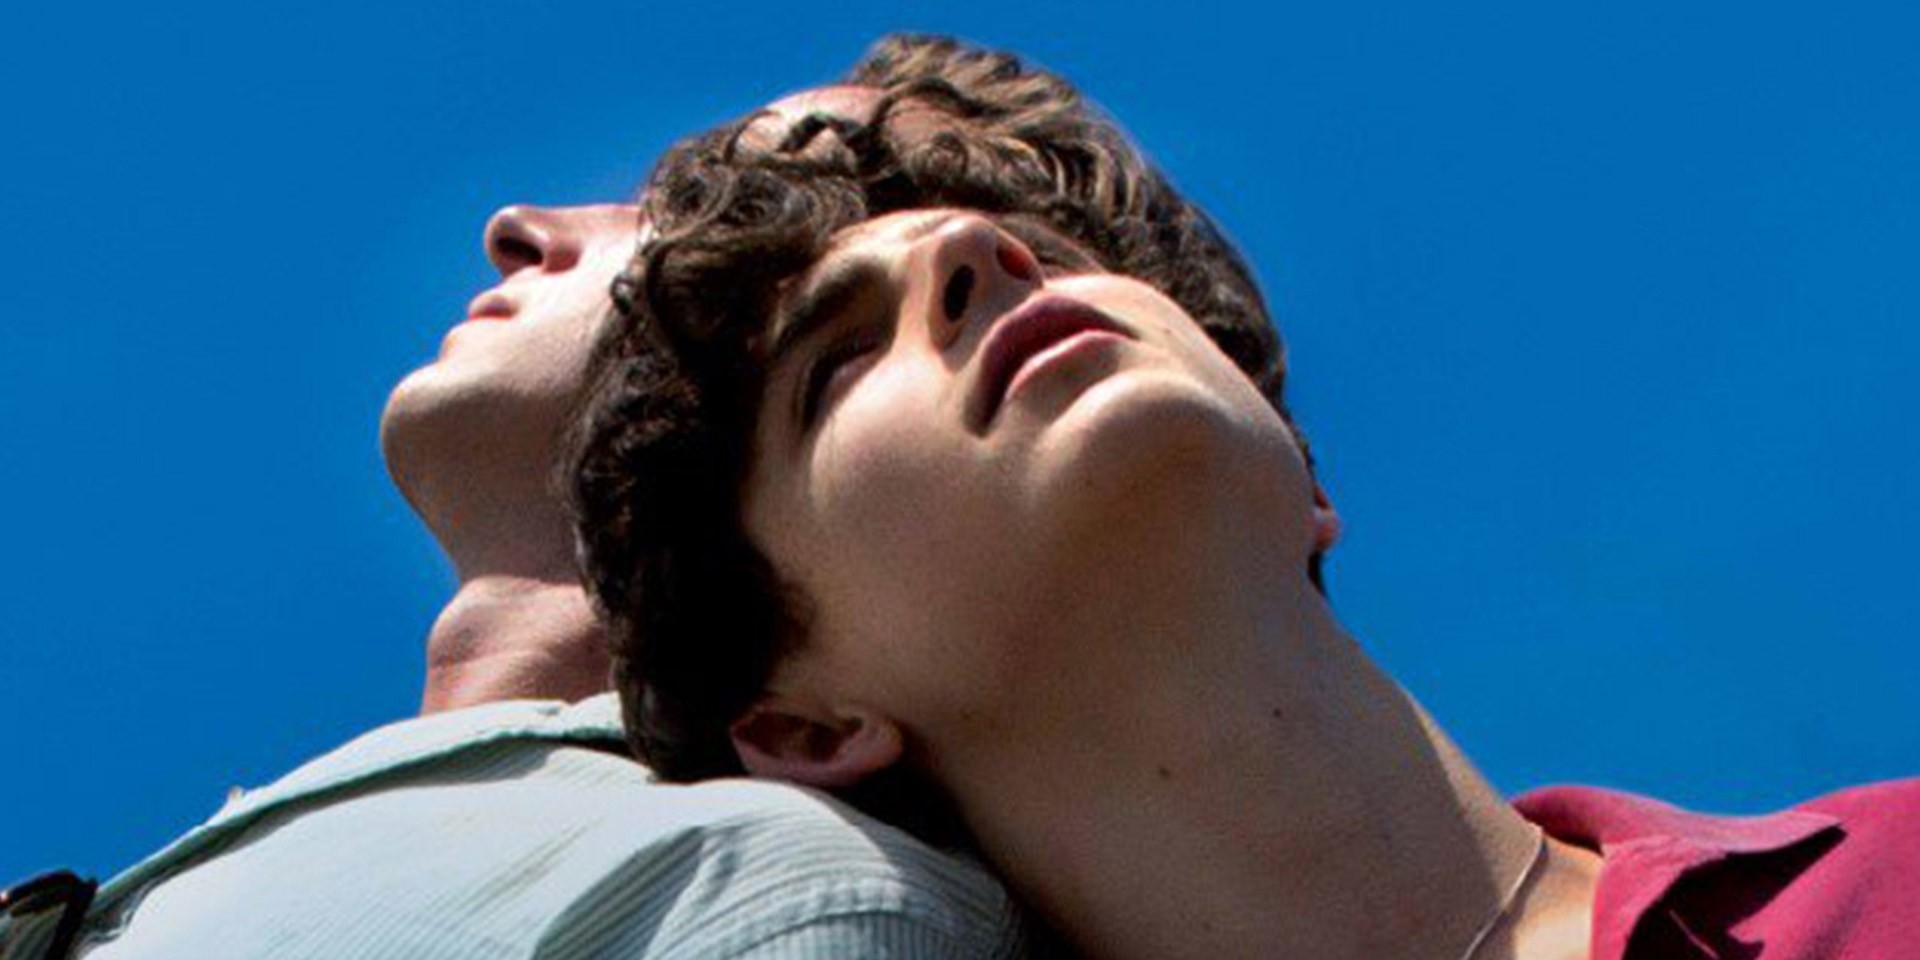 Manila Symphony Orchestra to live score Call Me By Your Name soundtrack in concert